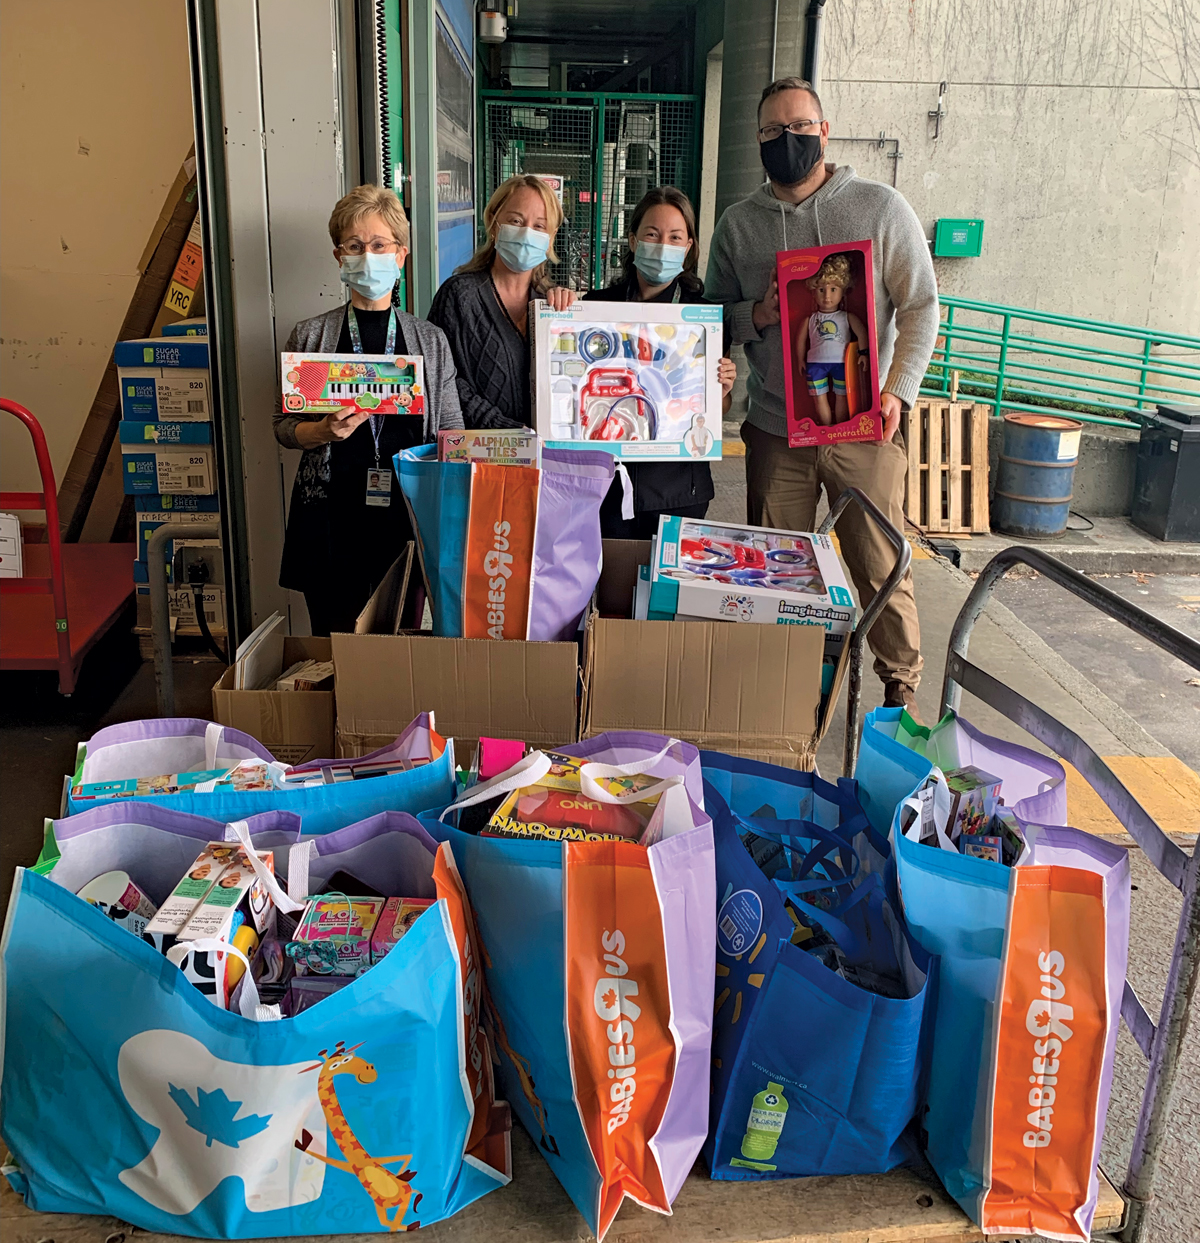 "It’s the expression of joy on the faces of the hospital staff at the Pediatric Ward when we deliver the toys. Realizing our efforts have brightened people’s lives who need it the most is so cool.” – MS Russell Blackburn, organizer of the Dave Barber Golf Tournament